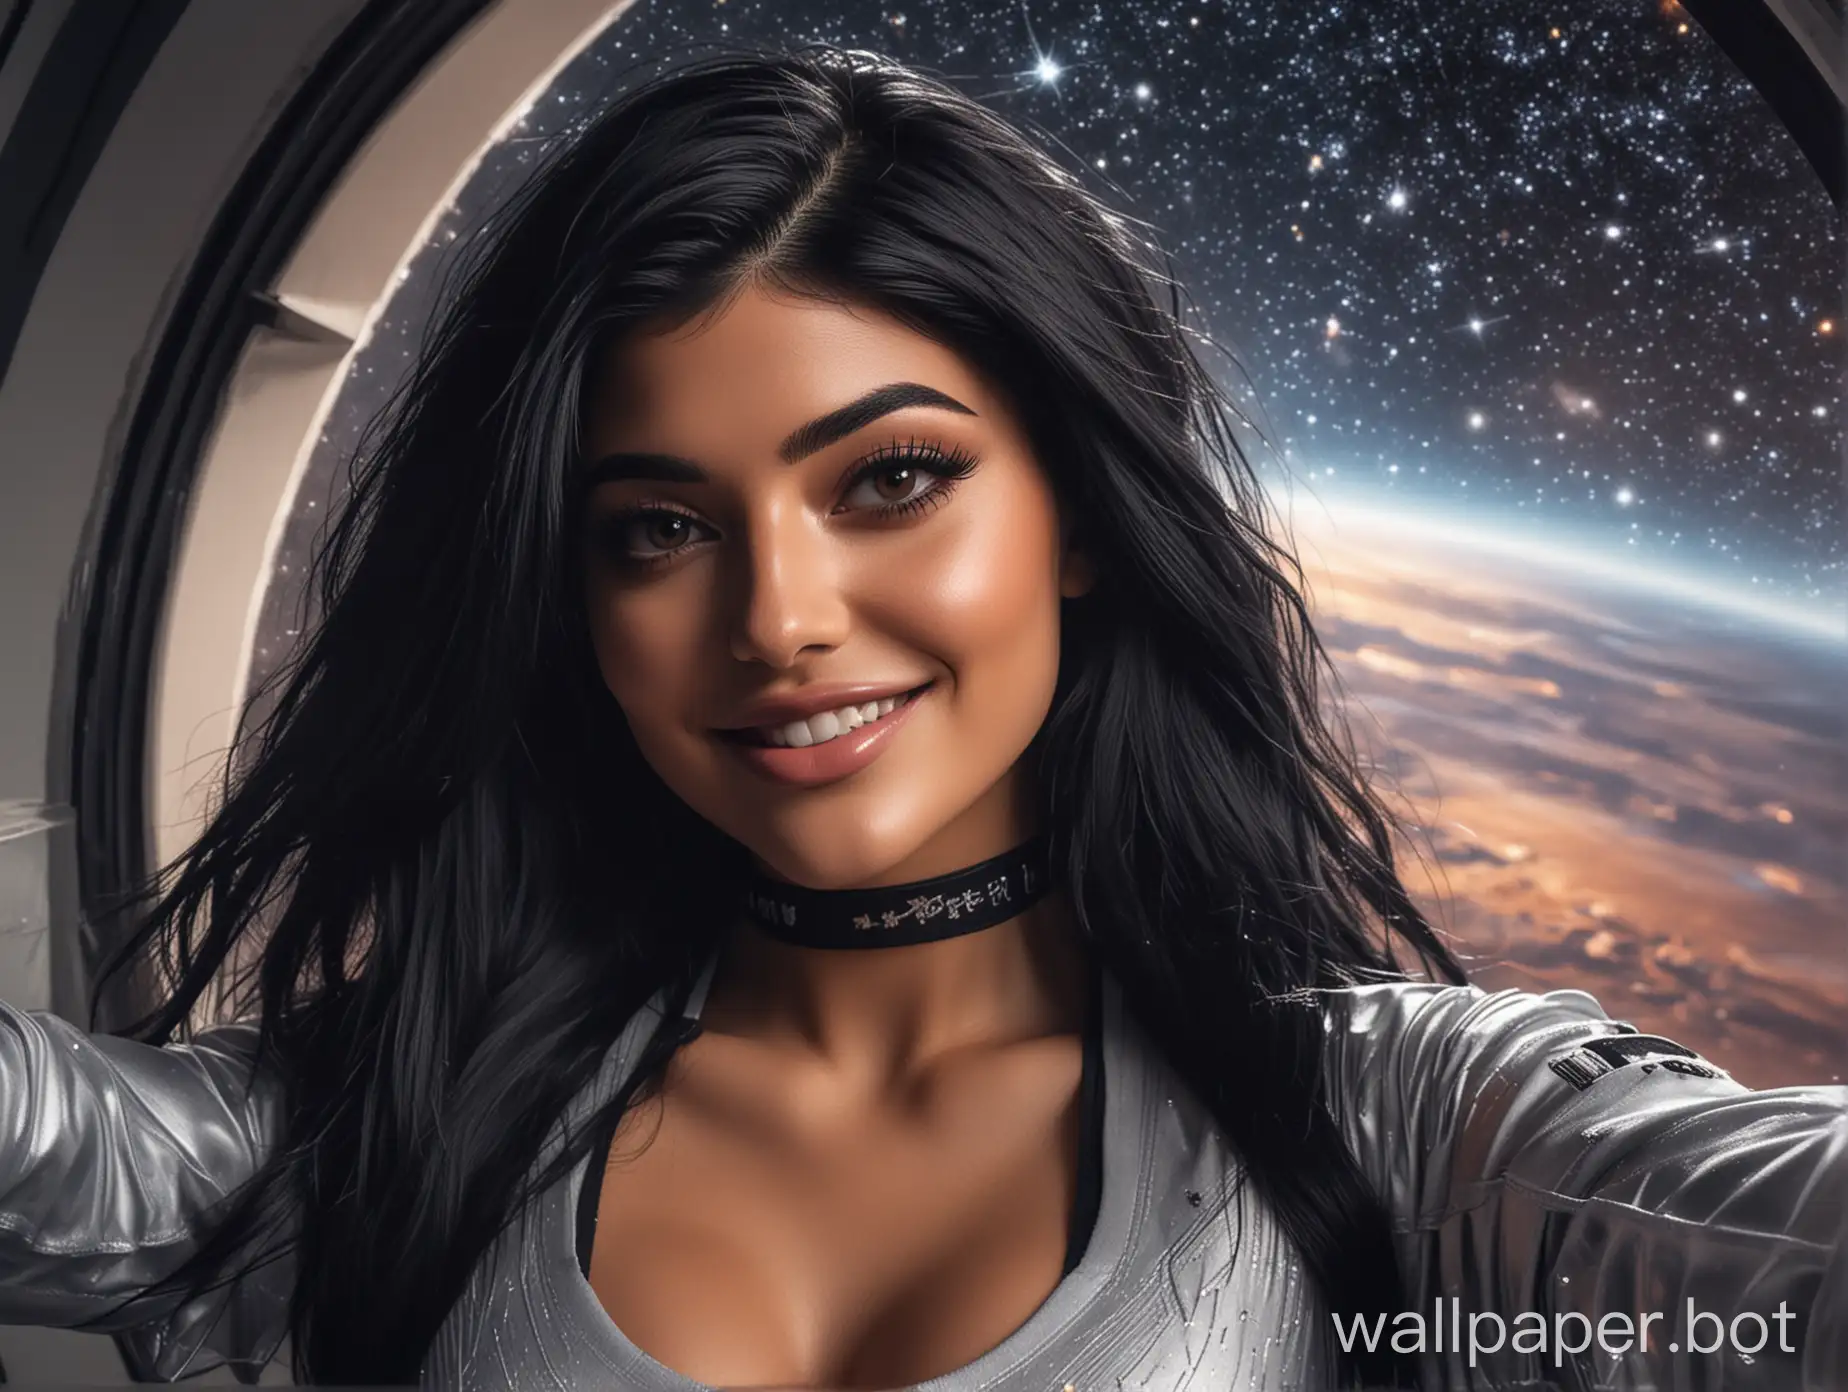 female with Kylie Jenner face taking selfie,  Science-Fiction, close-up headshot, Wear sporty cyberoutfit with cleavage , curvy female body shape, stars and planet through a window in the background, black shoulder long hair, natural black eyes, open smiling with showing teeth, over-the-shoulder shot